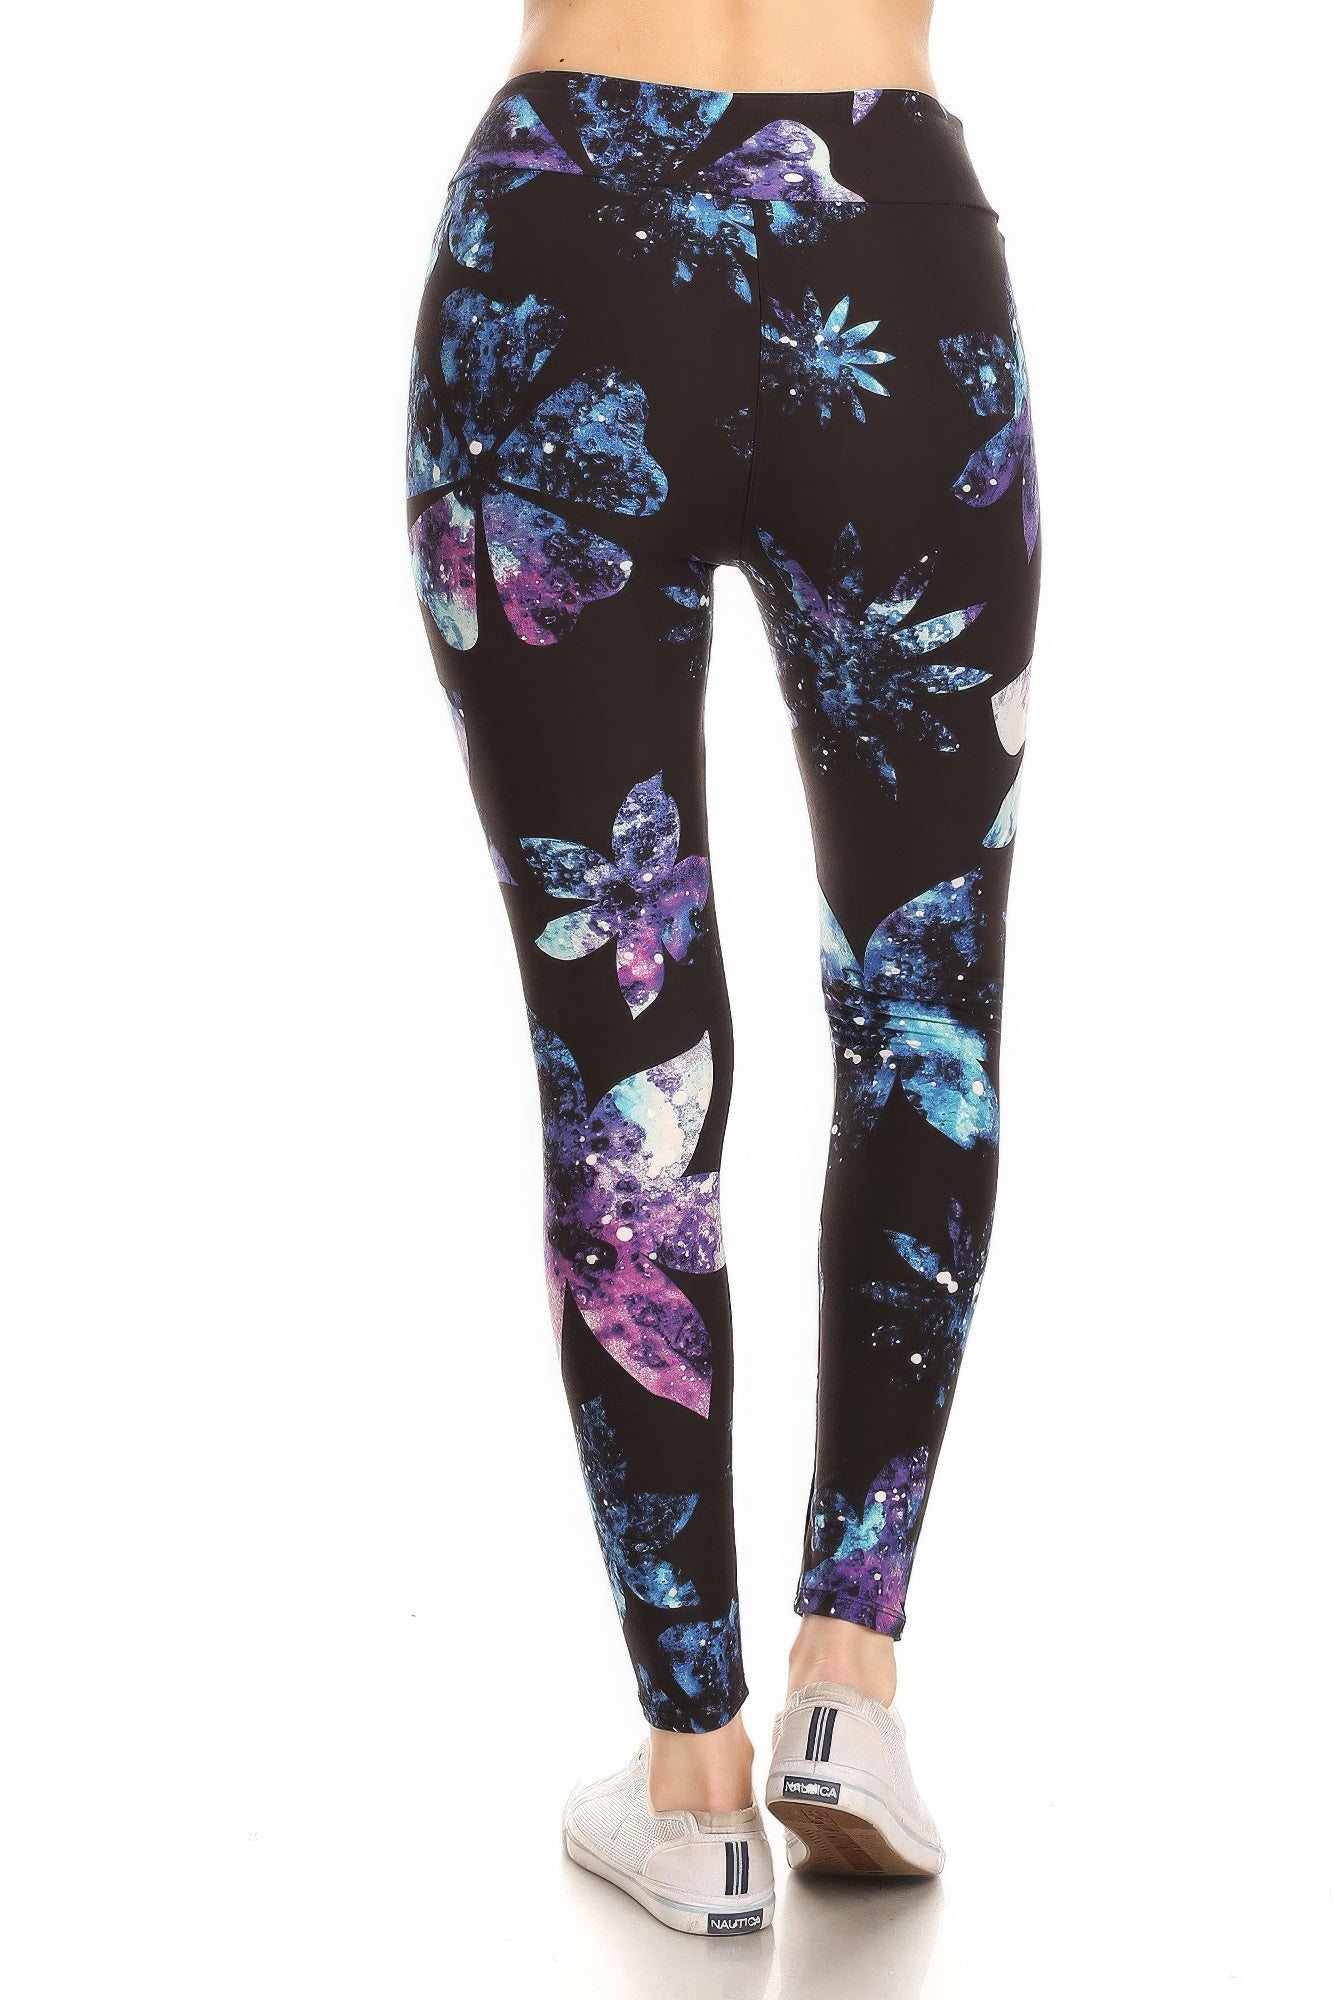 FZ Women's Banded Lined Galaxy Silhouette Floral Print, Full Length Leggings